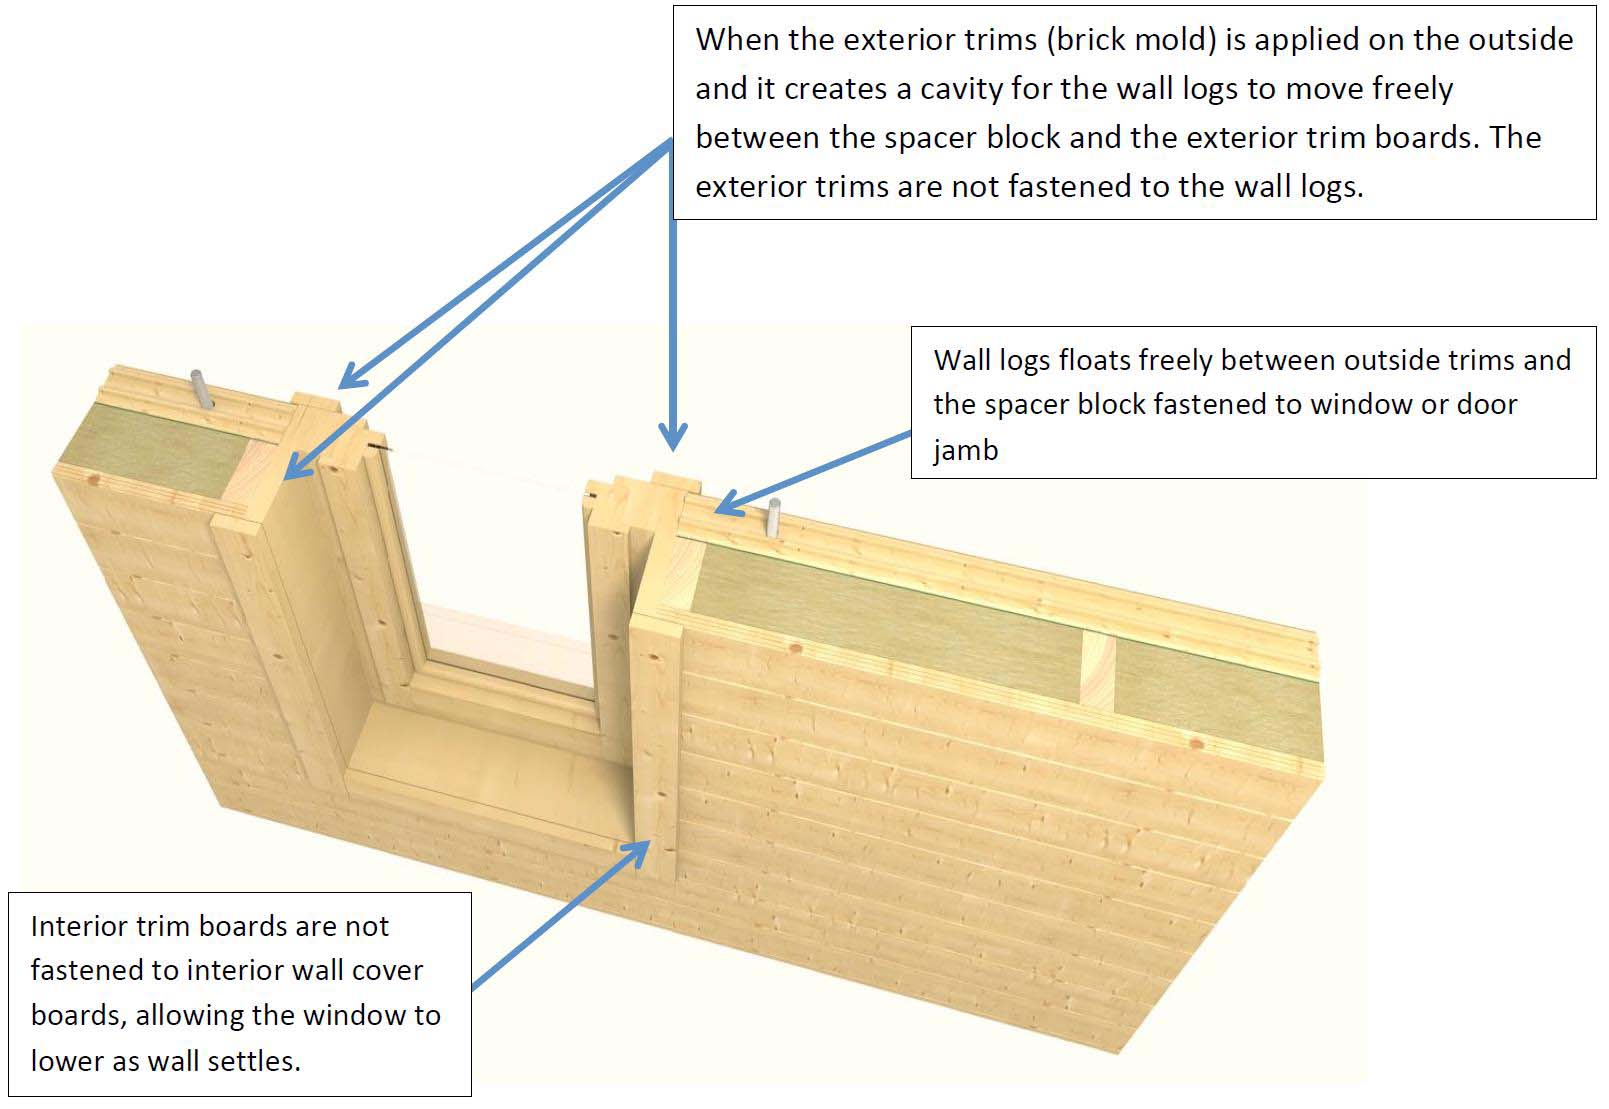 Windows & Doors insulation. When the exterior trims (brick mold) is applied on the outside and it creates a cavity for the wall logs to move freely between the spacer block and the exterior trim board. The exterior trims are not fastened to the wall logs. Wall logs floats freely between outside trims and the spacer block fastened to window or door jamb. Interior trim boards are not fastened to interior wall cover boards, allowing the window to lower as wall sttles. Do it yourself building kits.